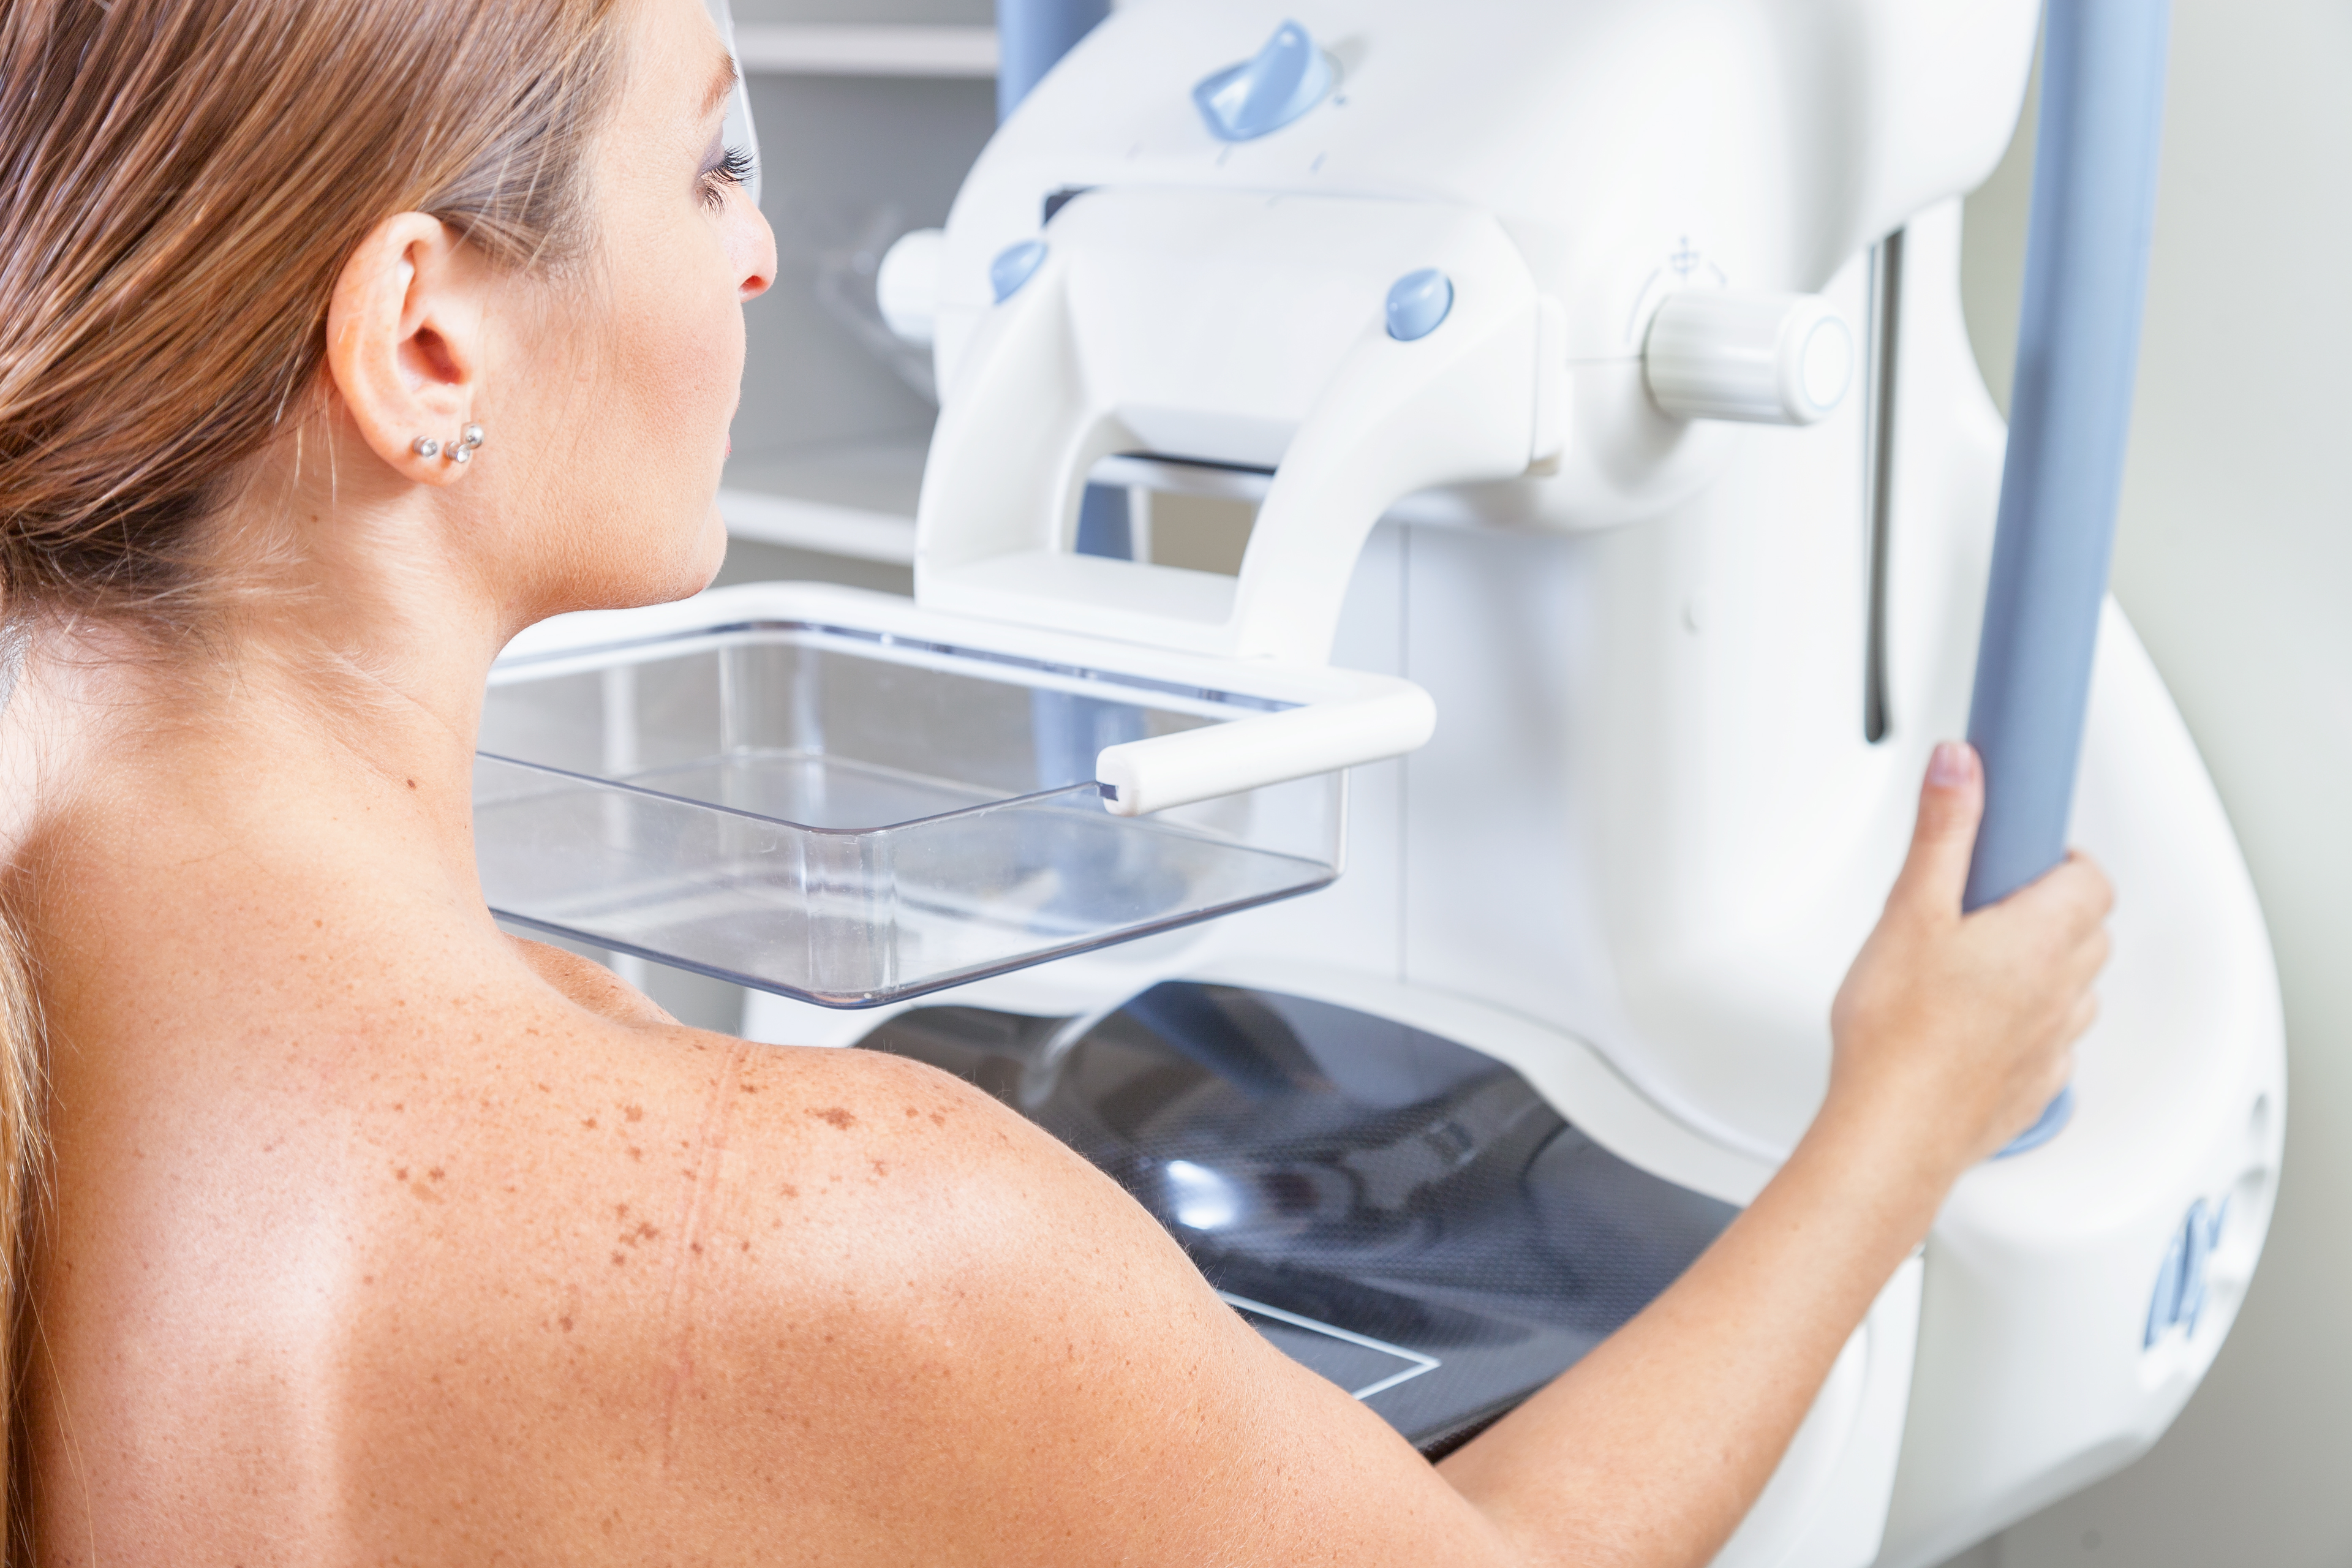 New Mammography Study Reveals Mixed Awareness on Breast Cancer Risks